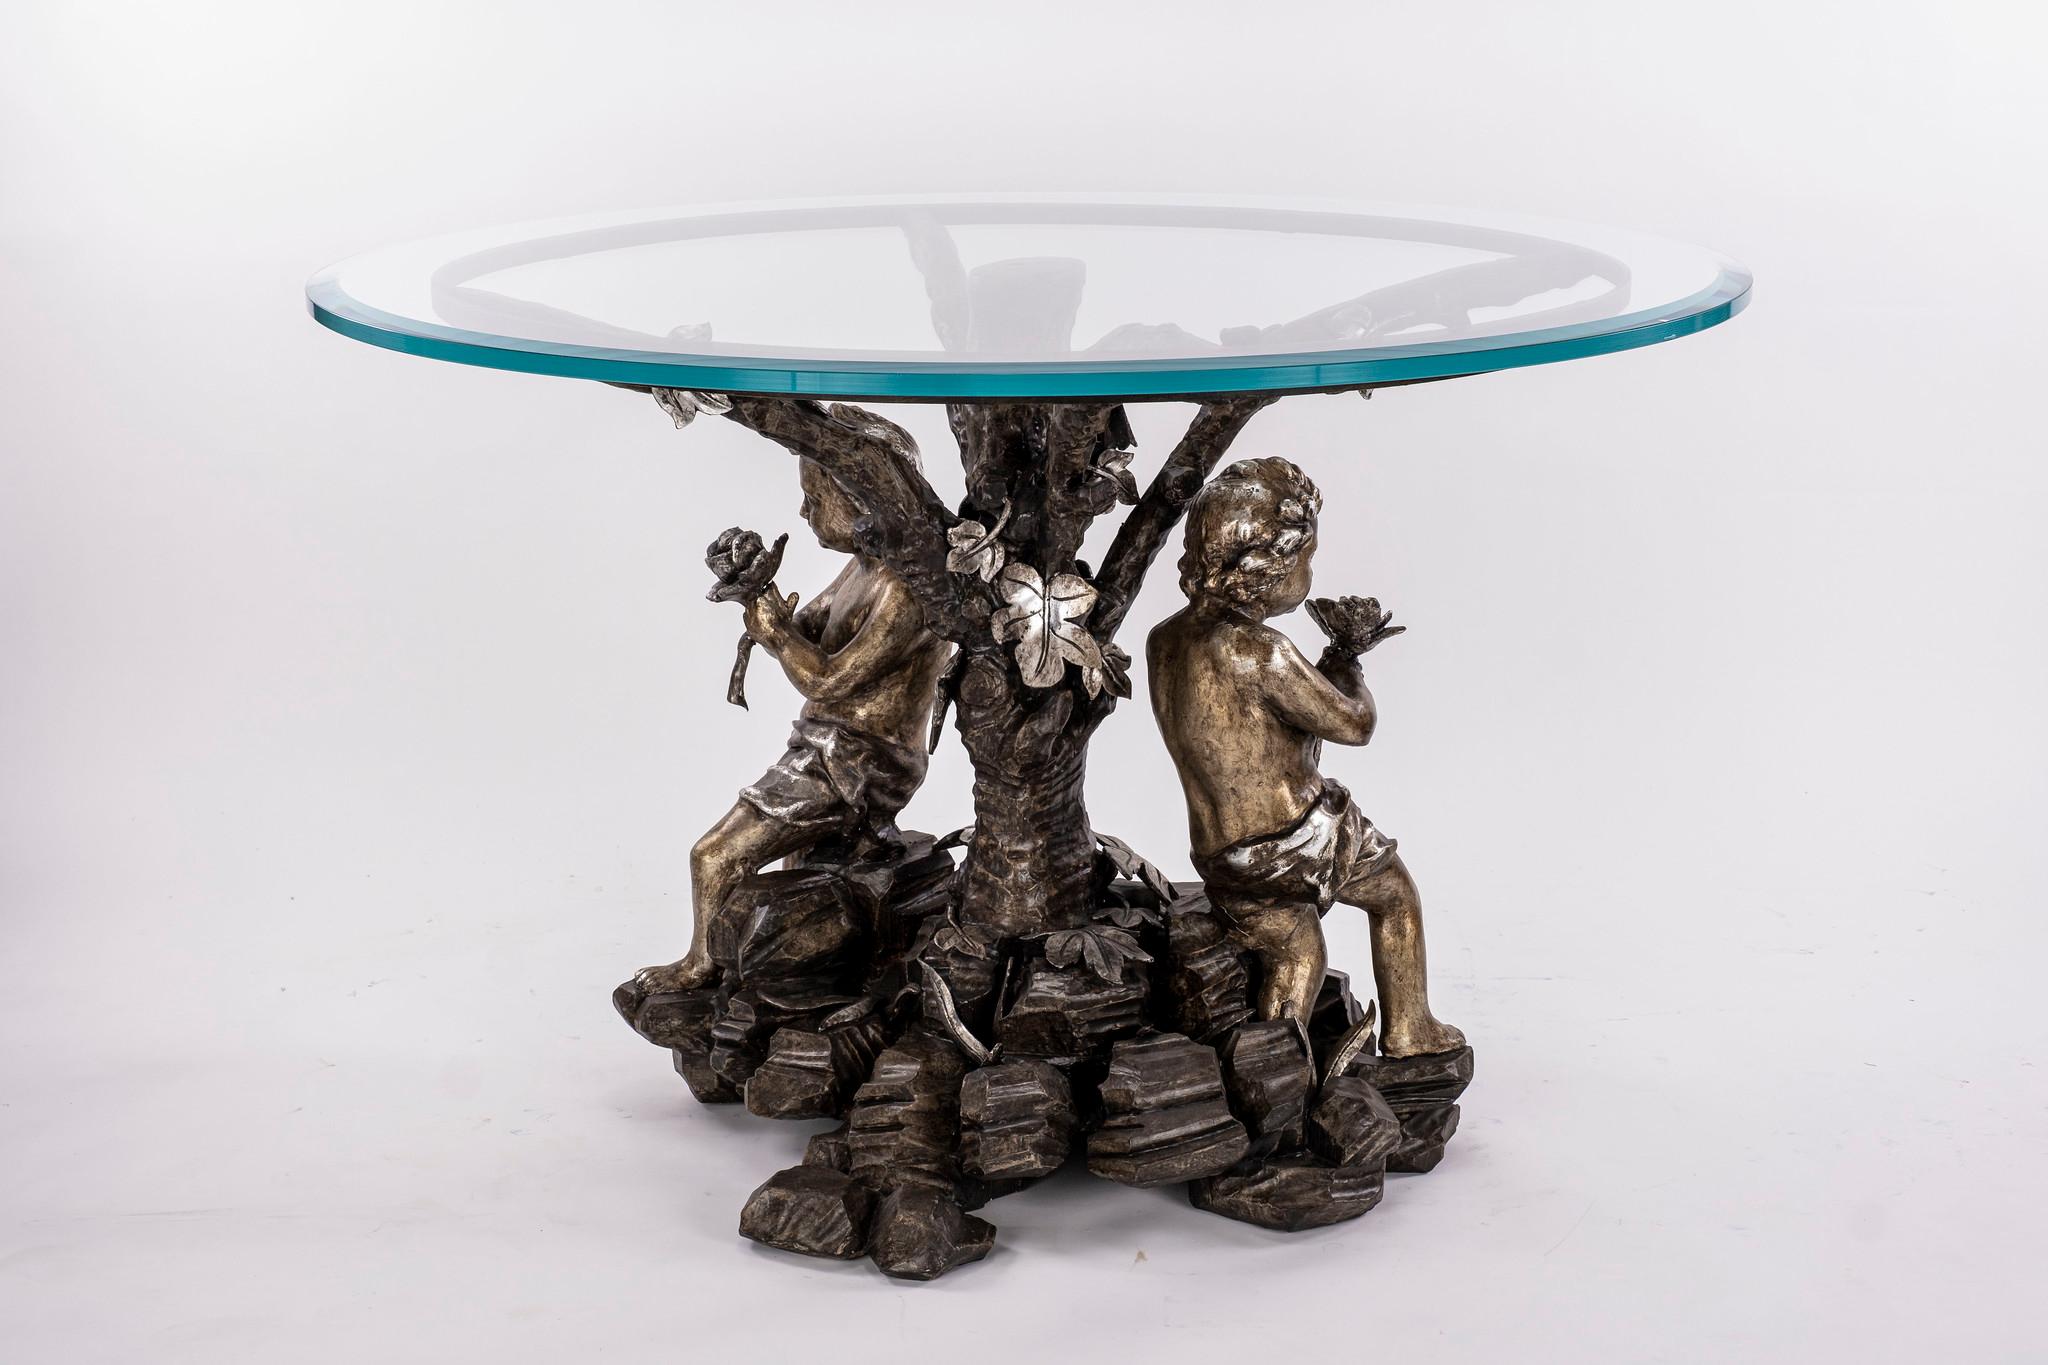 A beautiful 18th Century Italian Baroque silver giltwood and polychrome putti center table with Starphire glass tabletop.

Condition: Giltwood table base in excellent antique condition with surface wear and minor repairs consistent with age and